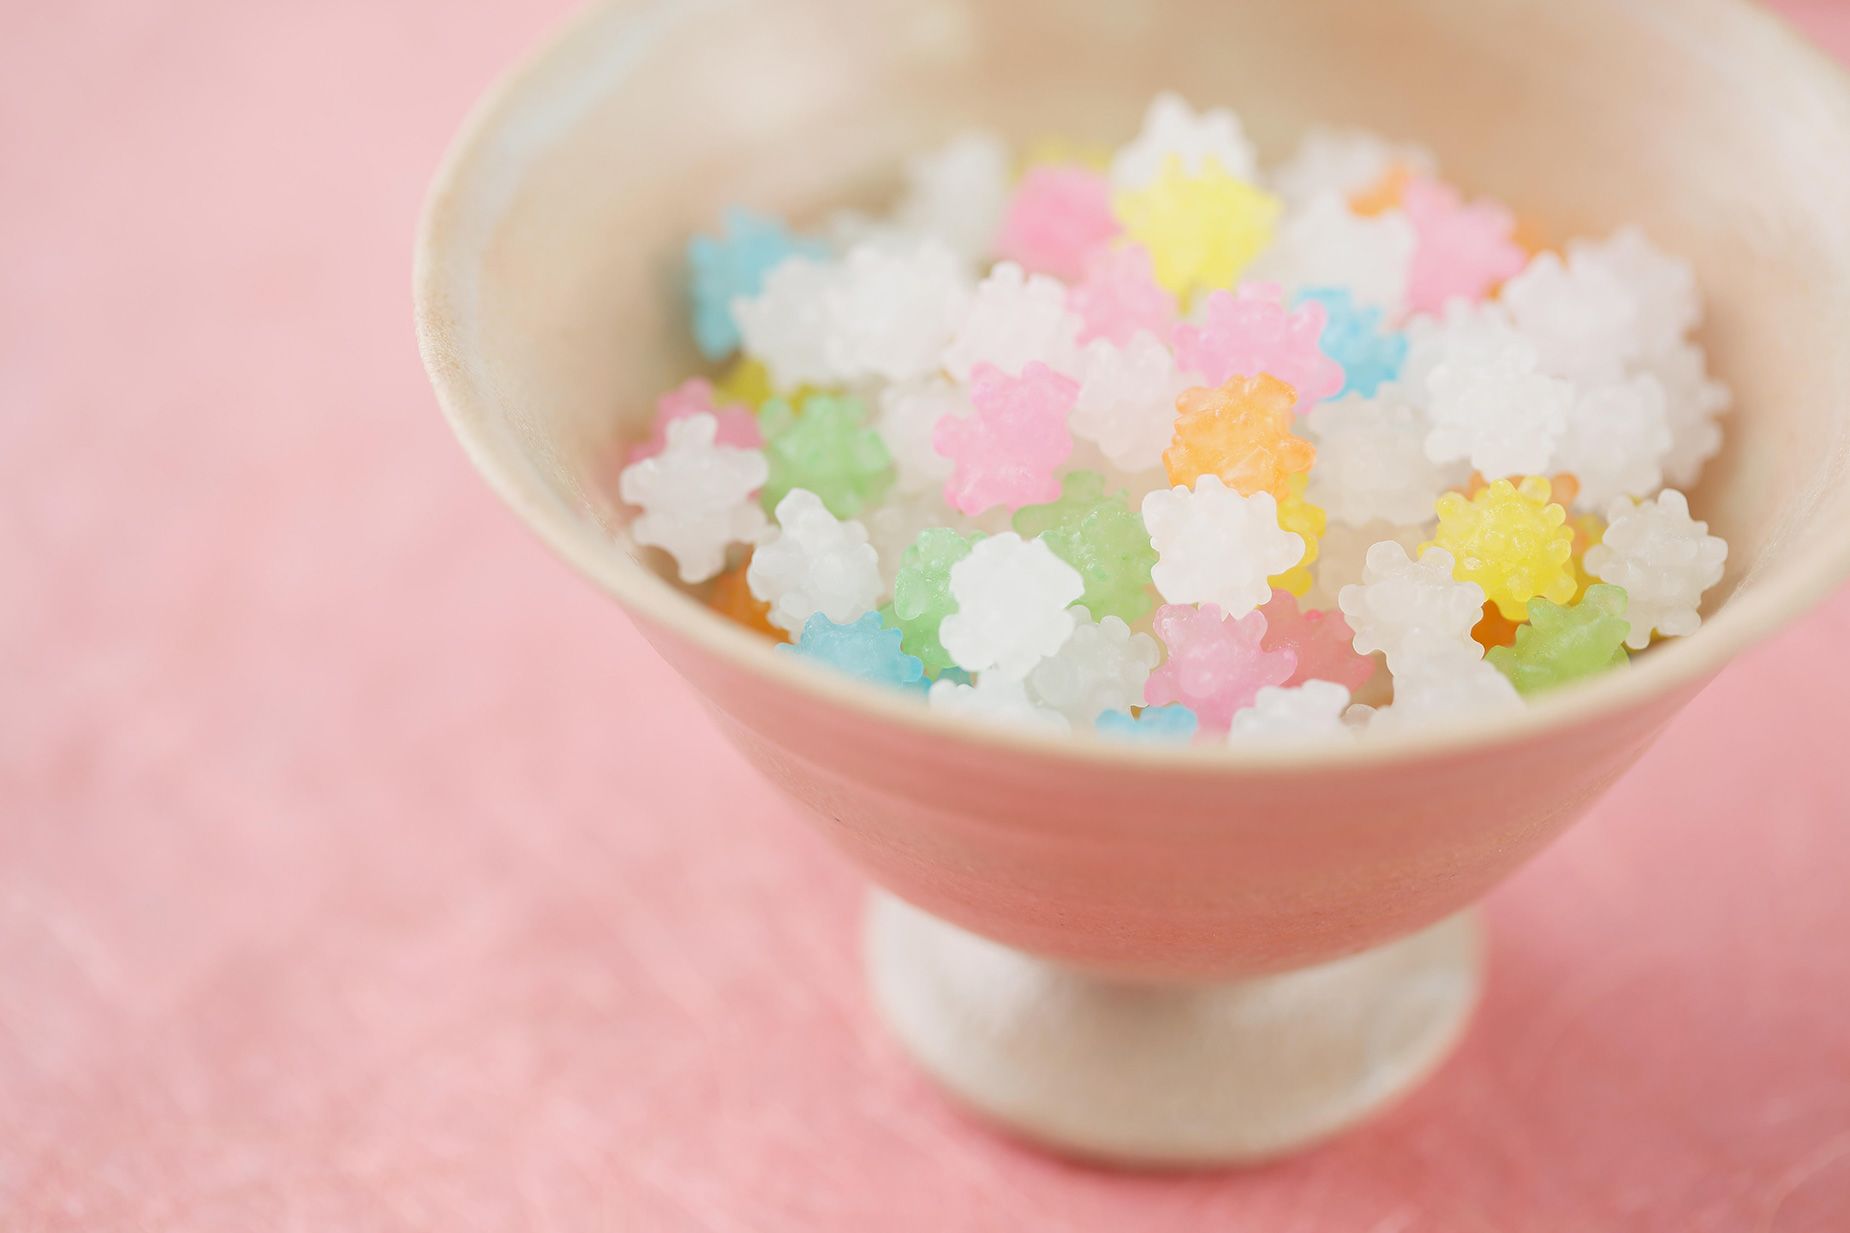 A bowl of colorful konpeito candies.